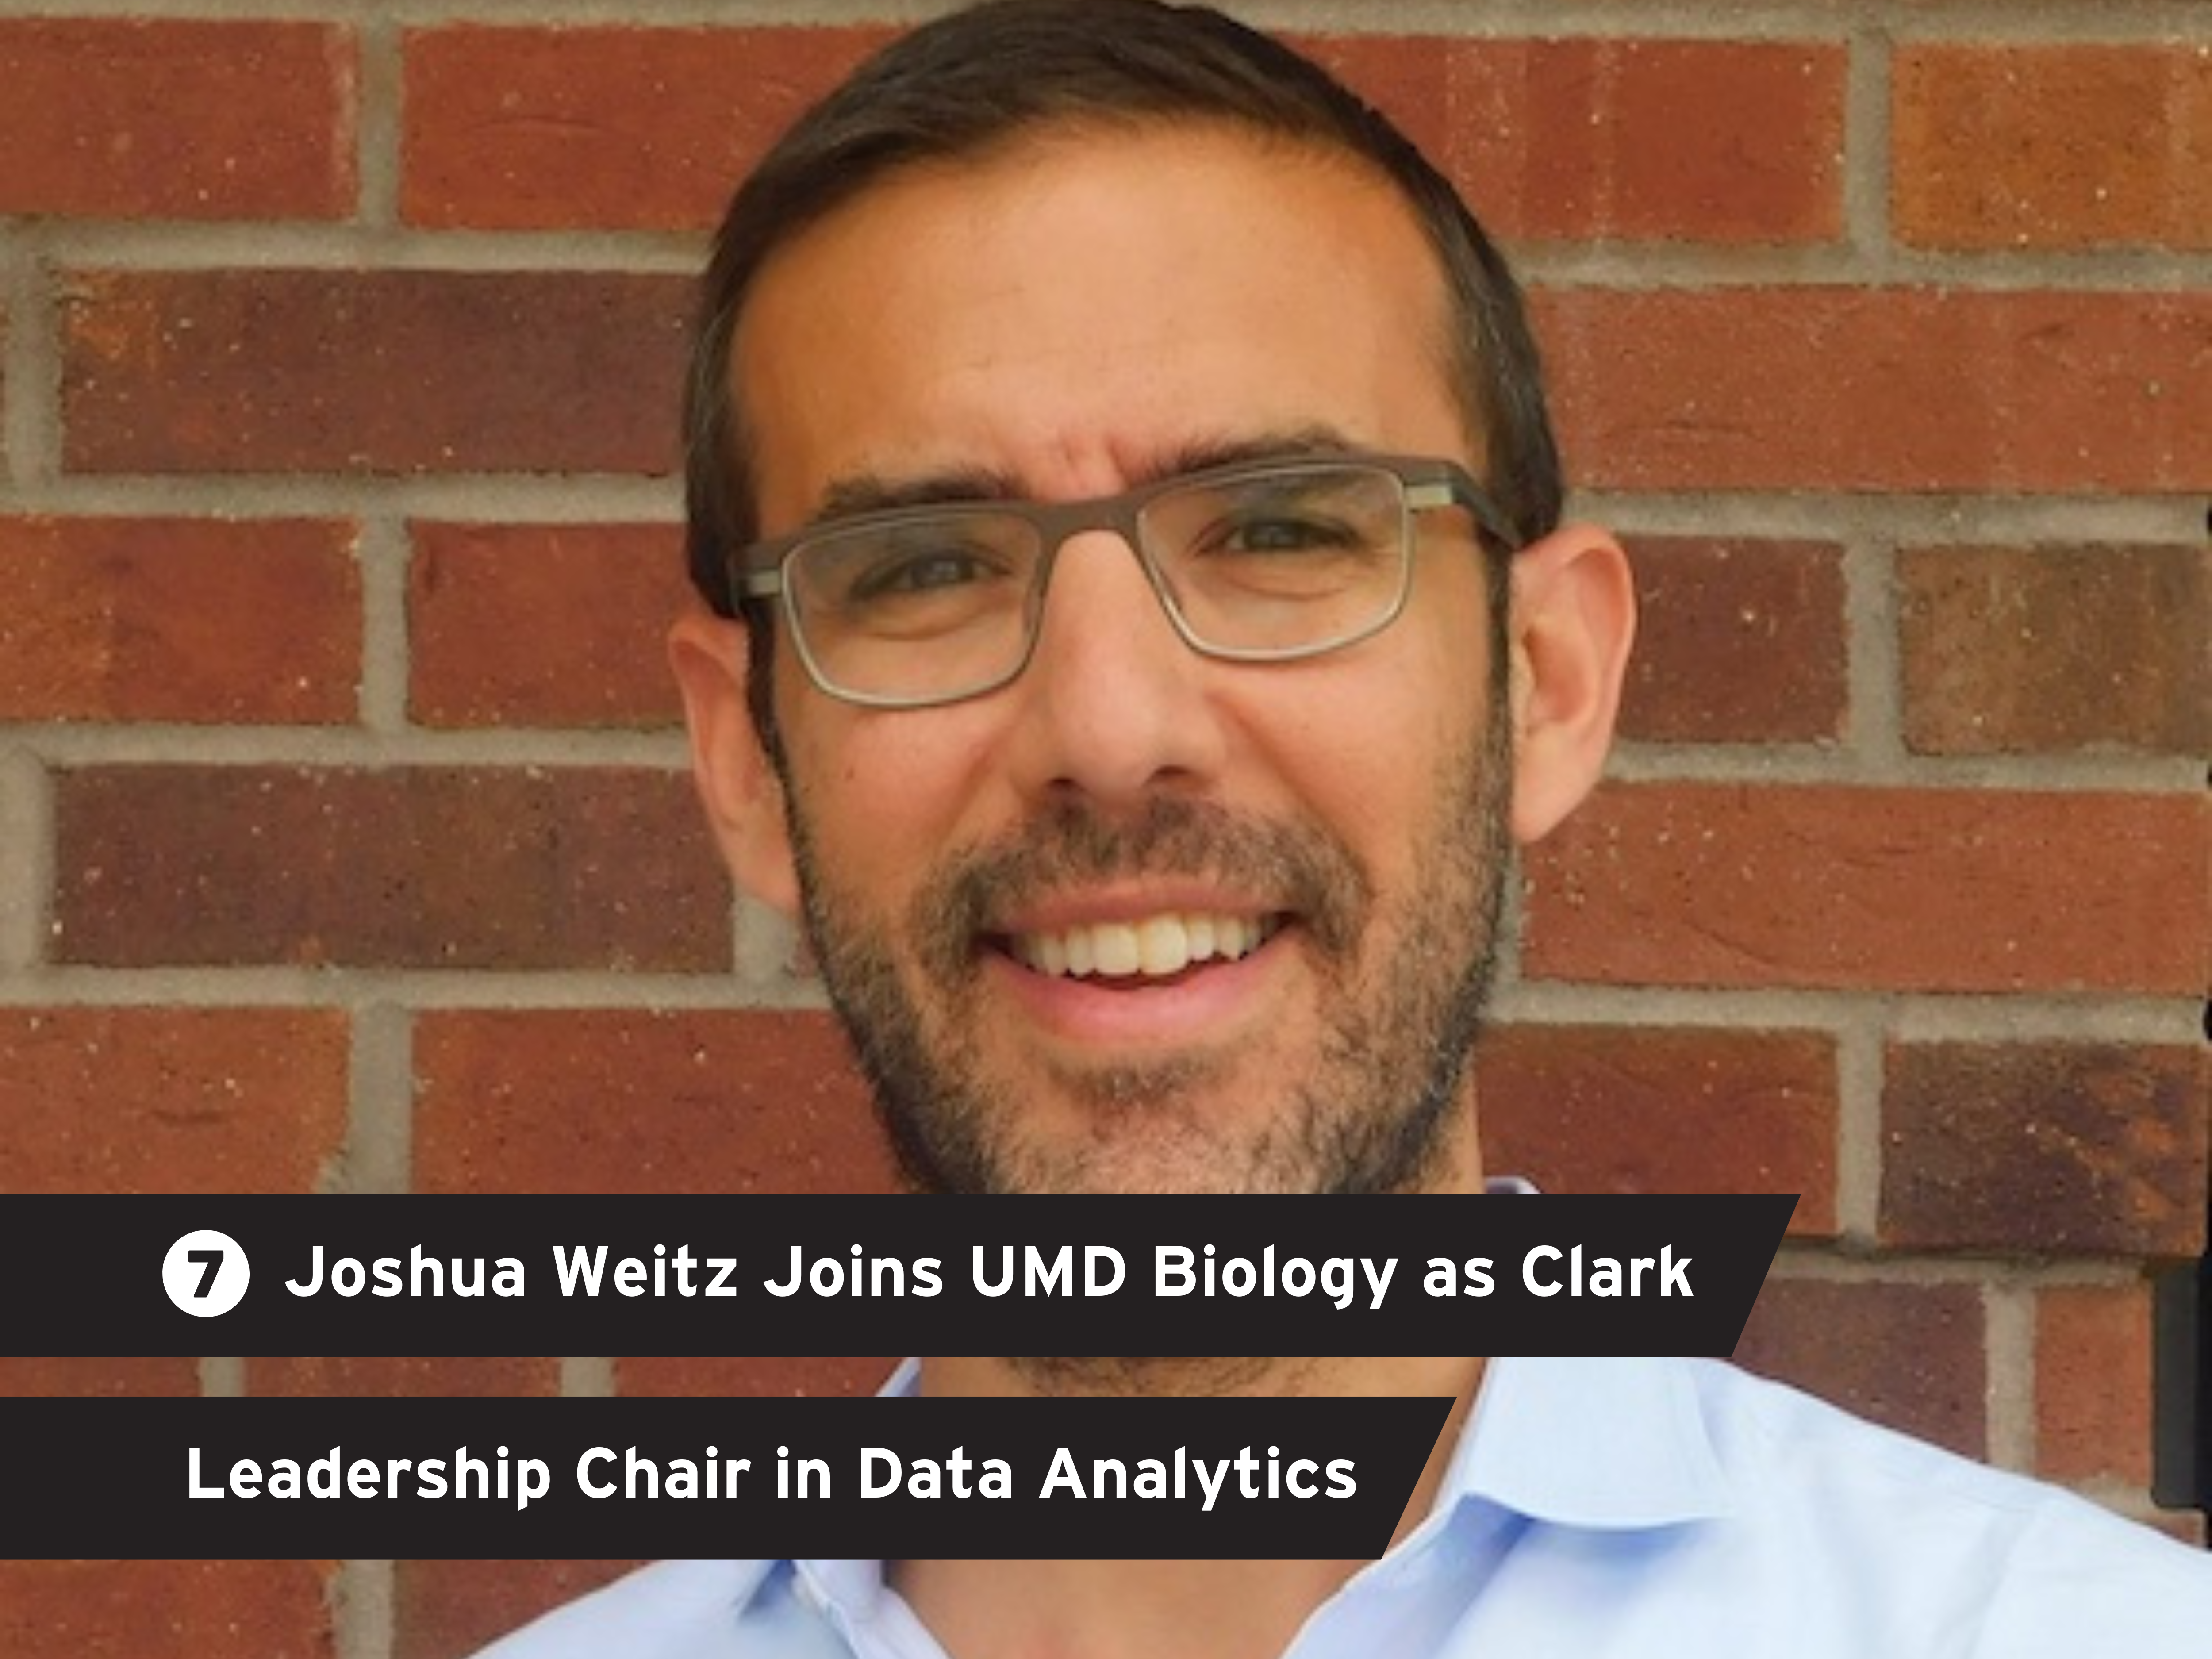 "Joshua Weitz Joins UMD’s Department of Biology as the Clark Leadership Chair in Data Analytics" over a headshot of Joshua Weitz in front of a brick wall